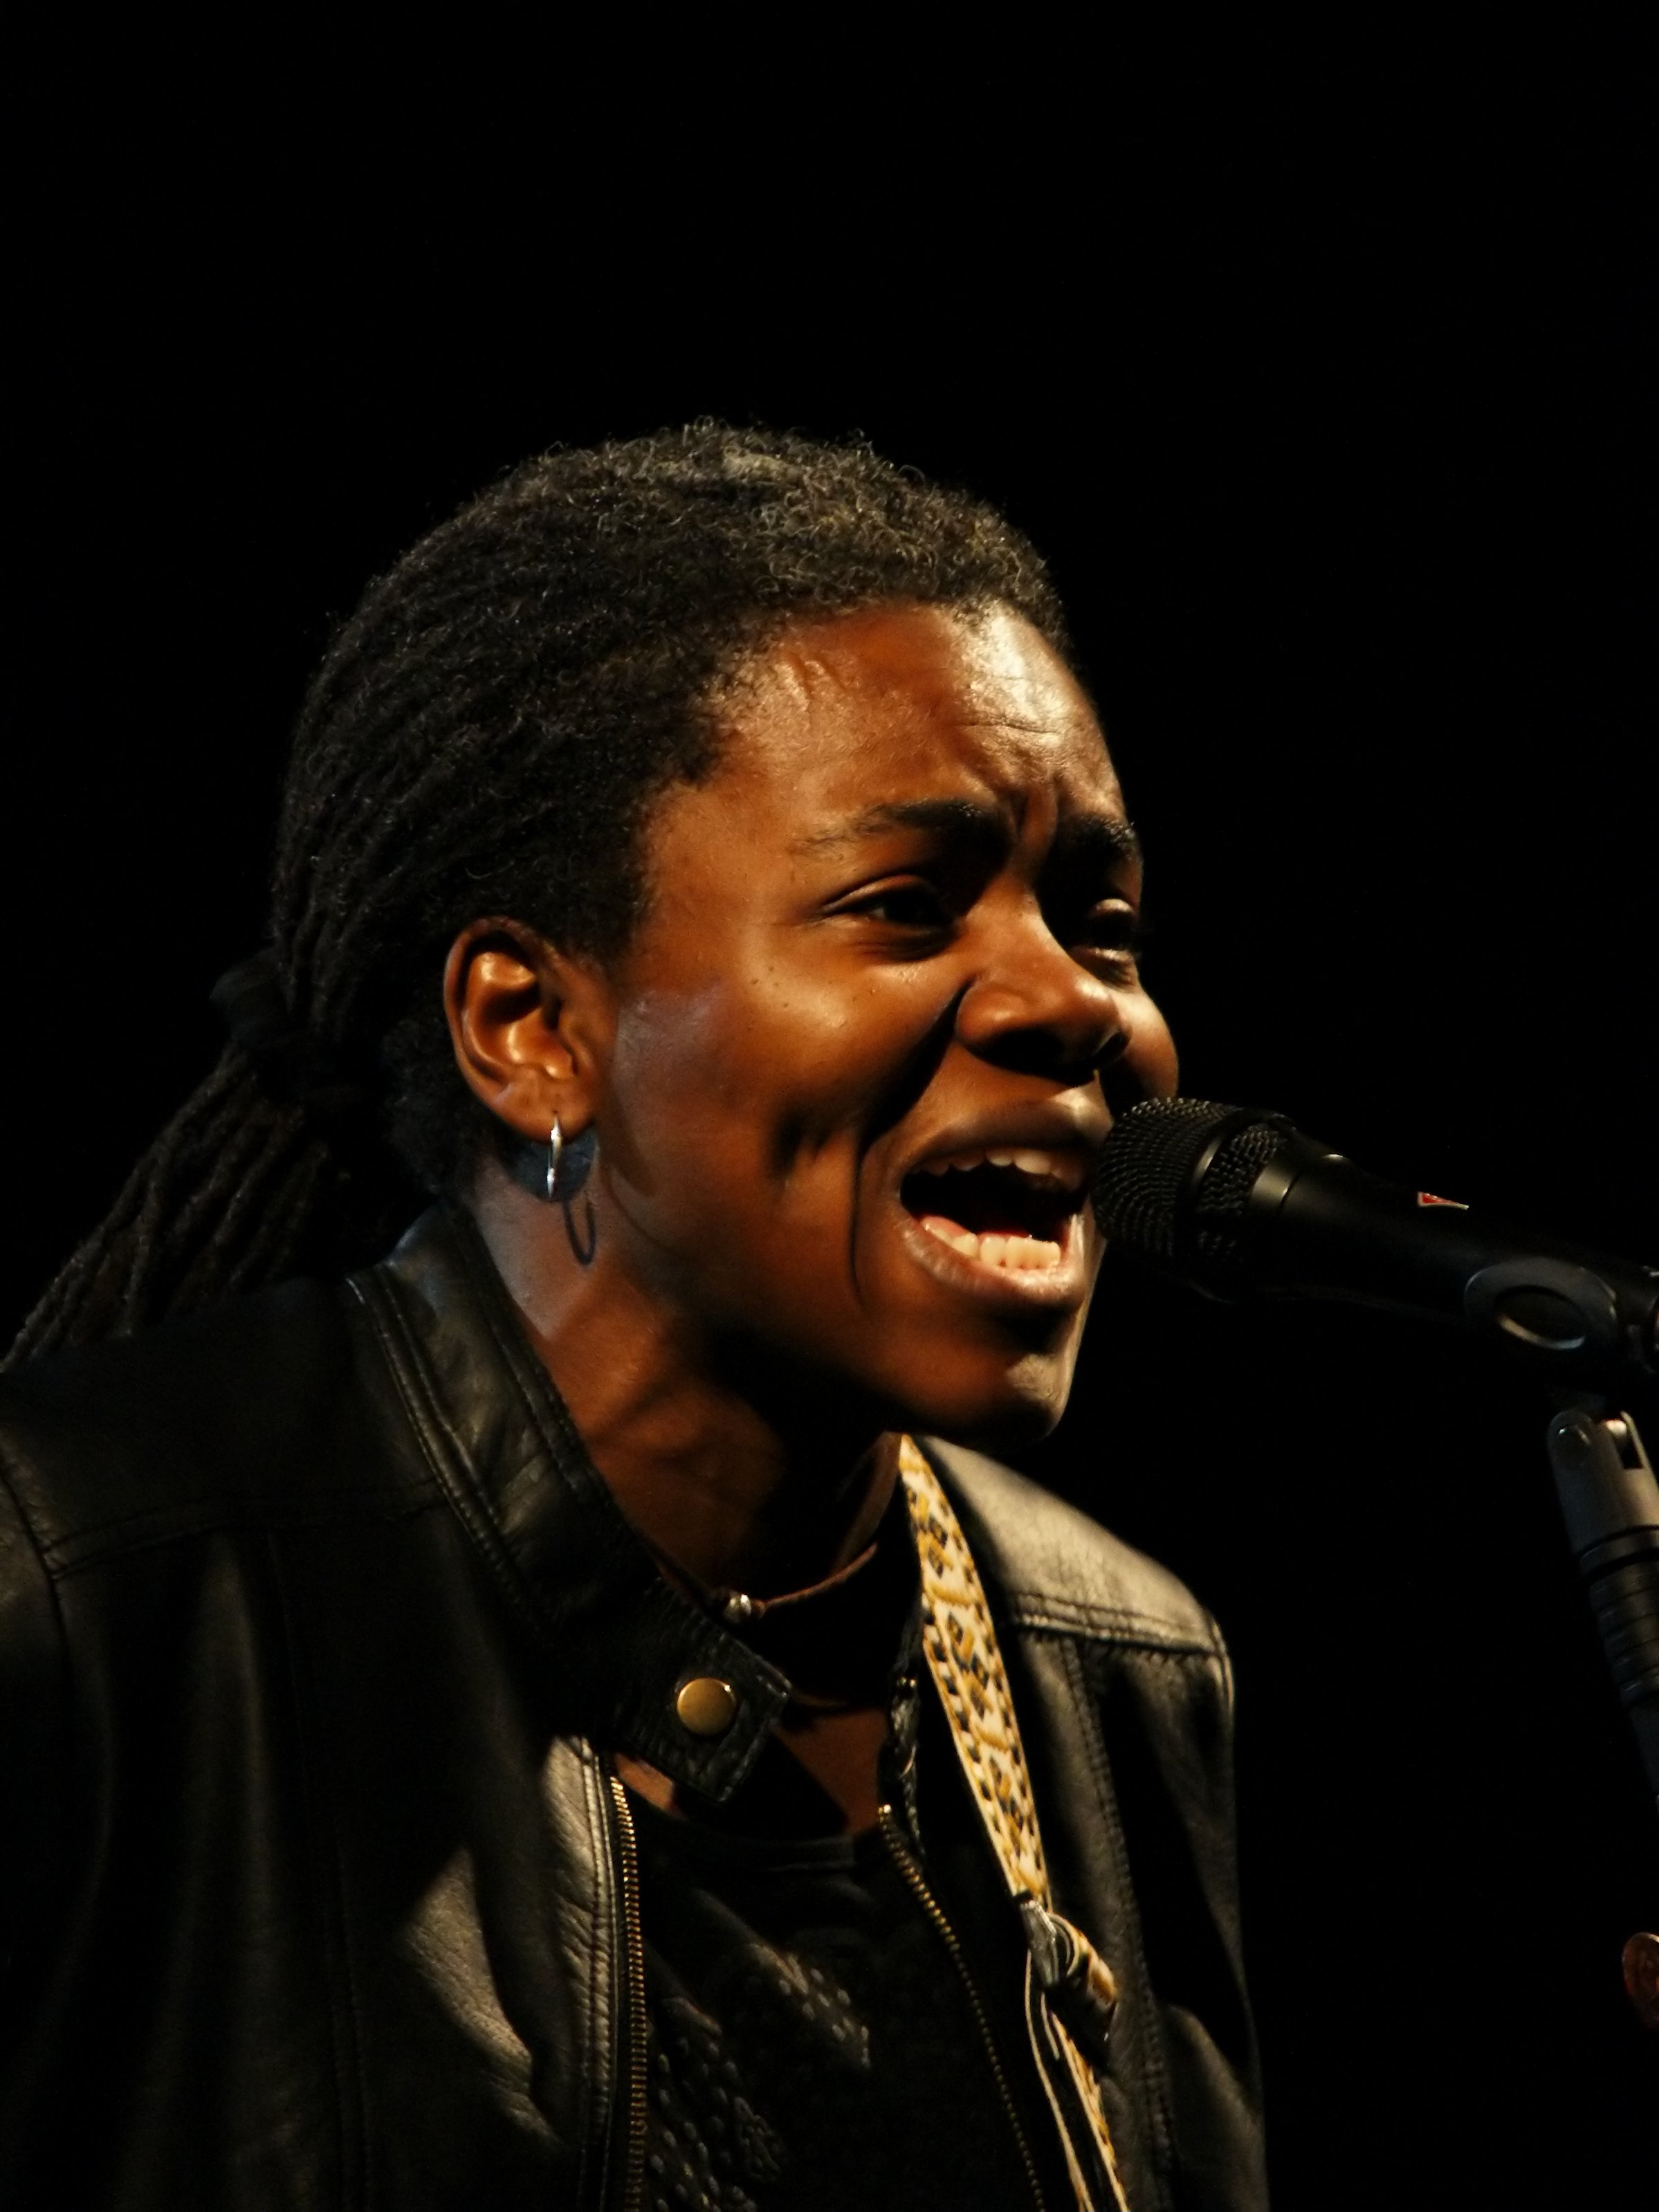 Tracy Chapman at the 2009 Cactus Festival in Bruges, Belgium on 10 July 2009 | Photo: Wikimedia Commons By © Hans Hillewaert, CC BY-SA 4.0